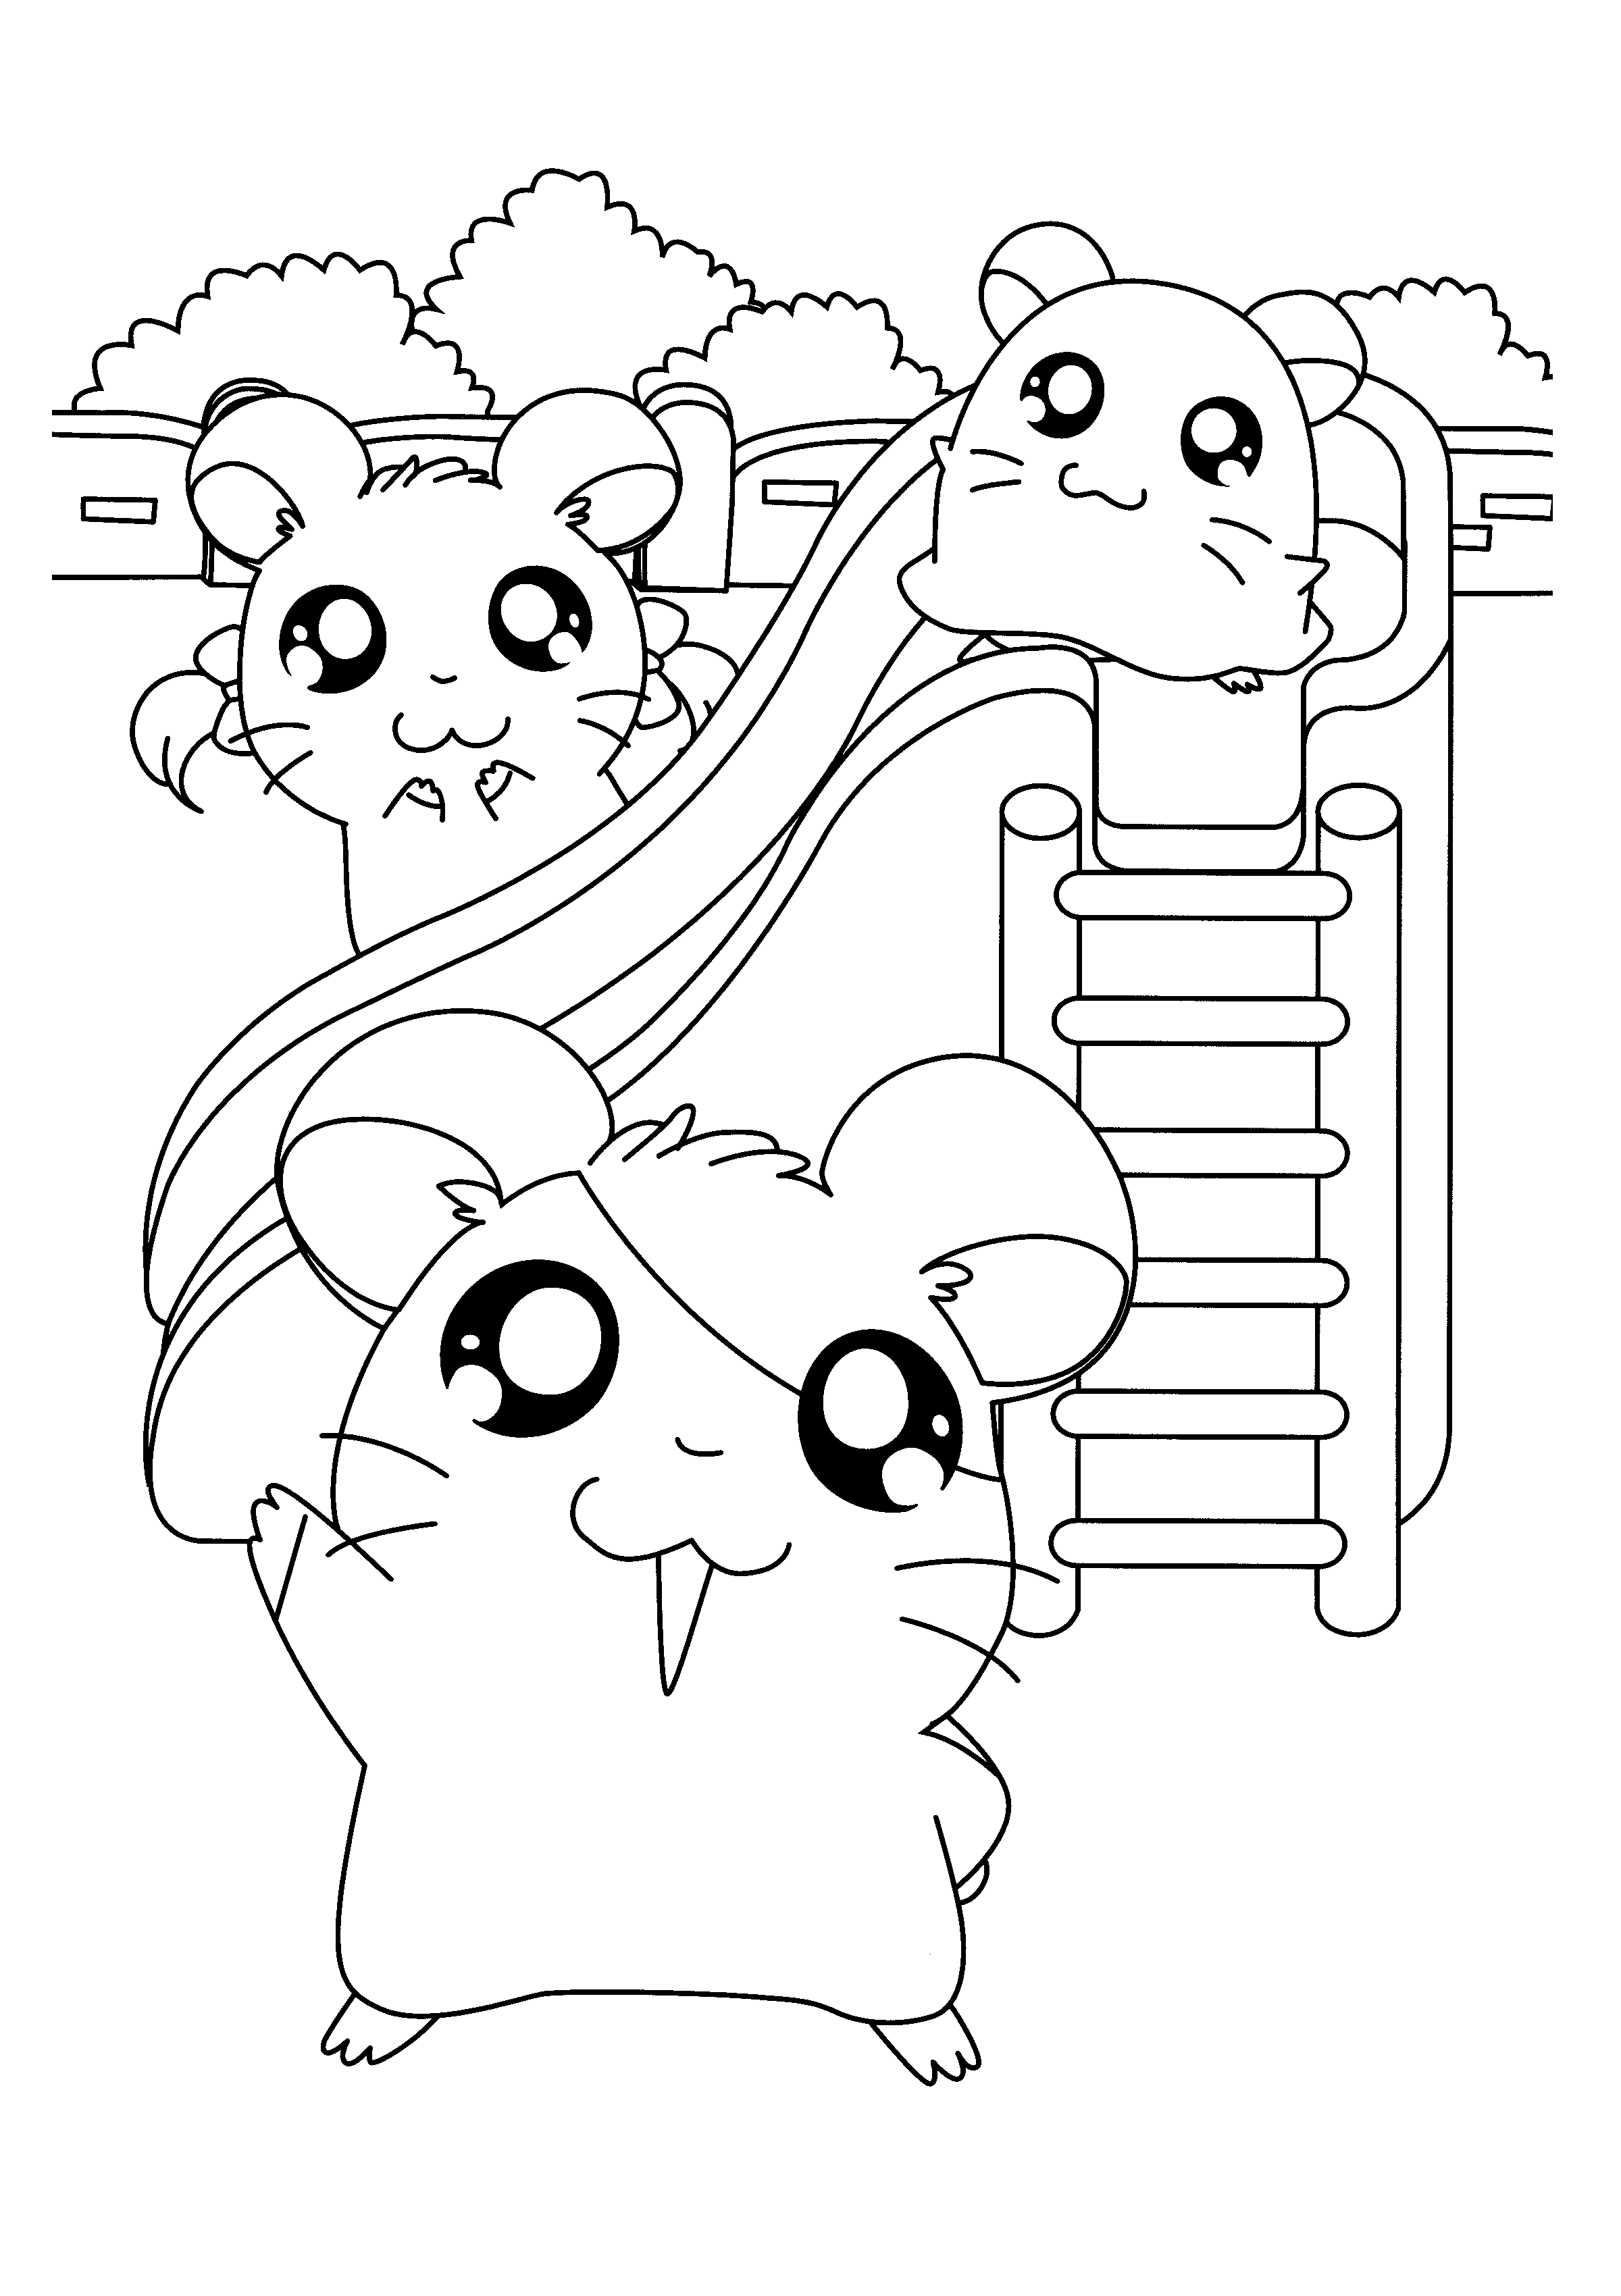 Hamtaro And Friends Play Slide Coloring Pages For Kids Fbl Printable Hamtaro Coloring